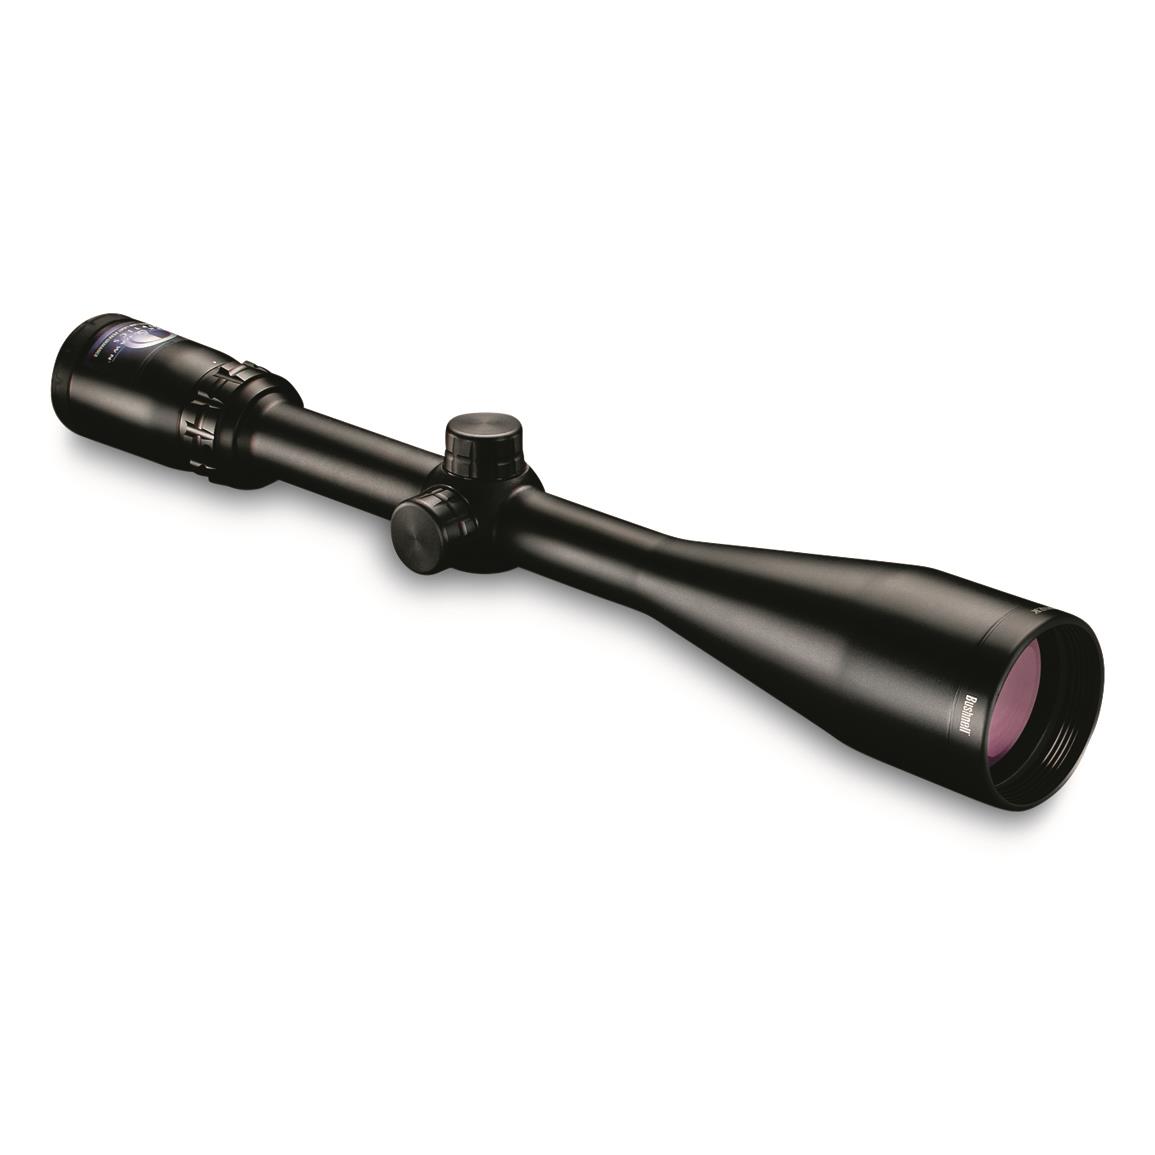 Bushnell Banner 3-9x50mm Rifle Scope, Multi-X Reticle